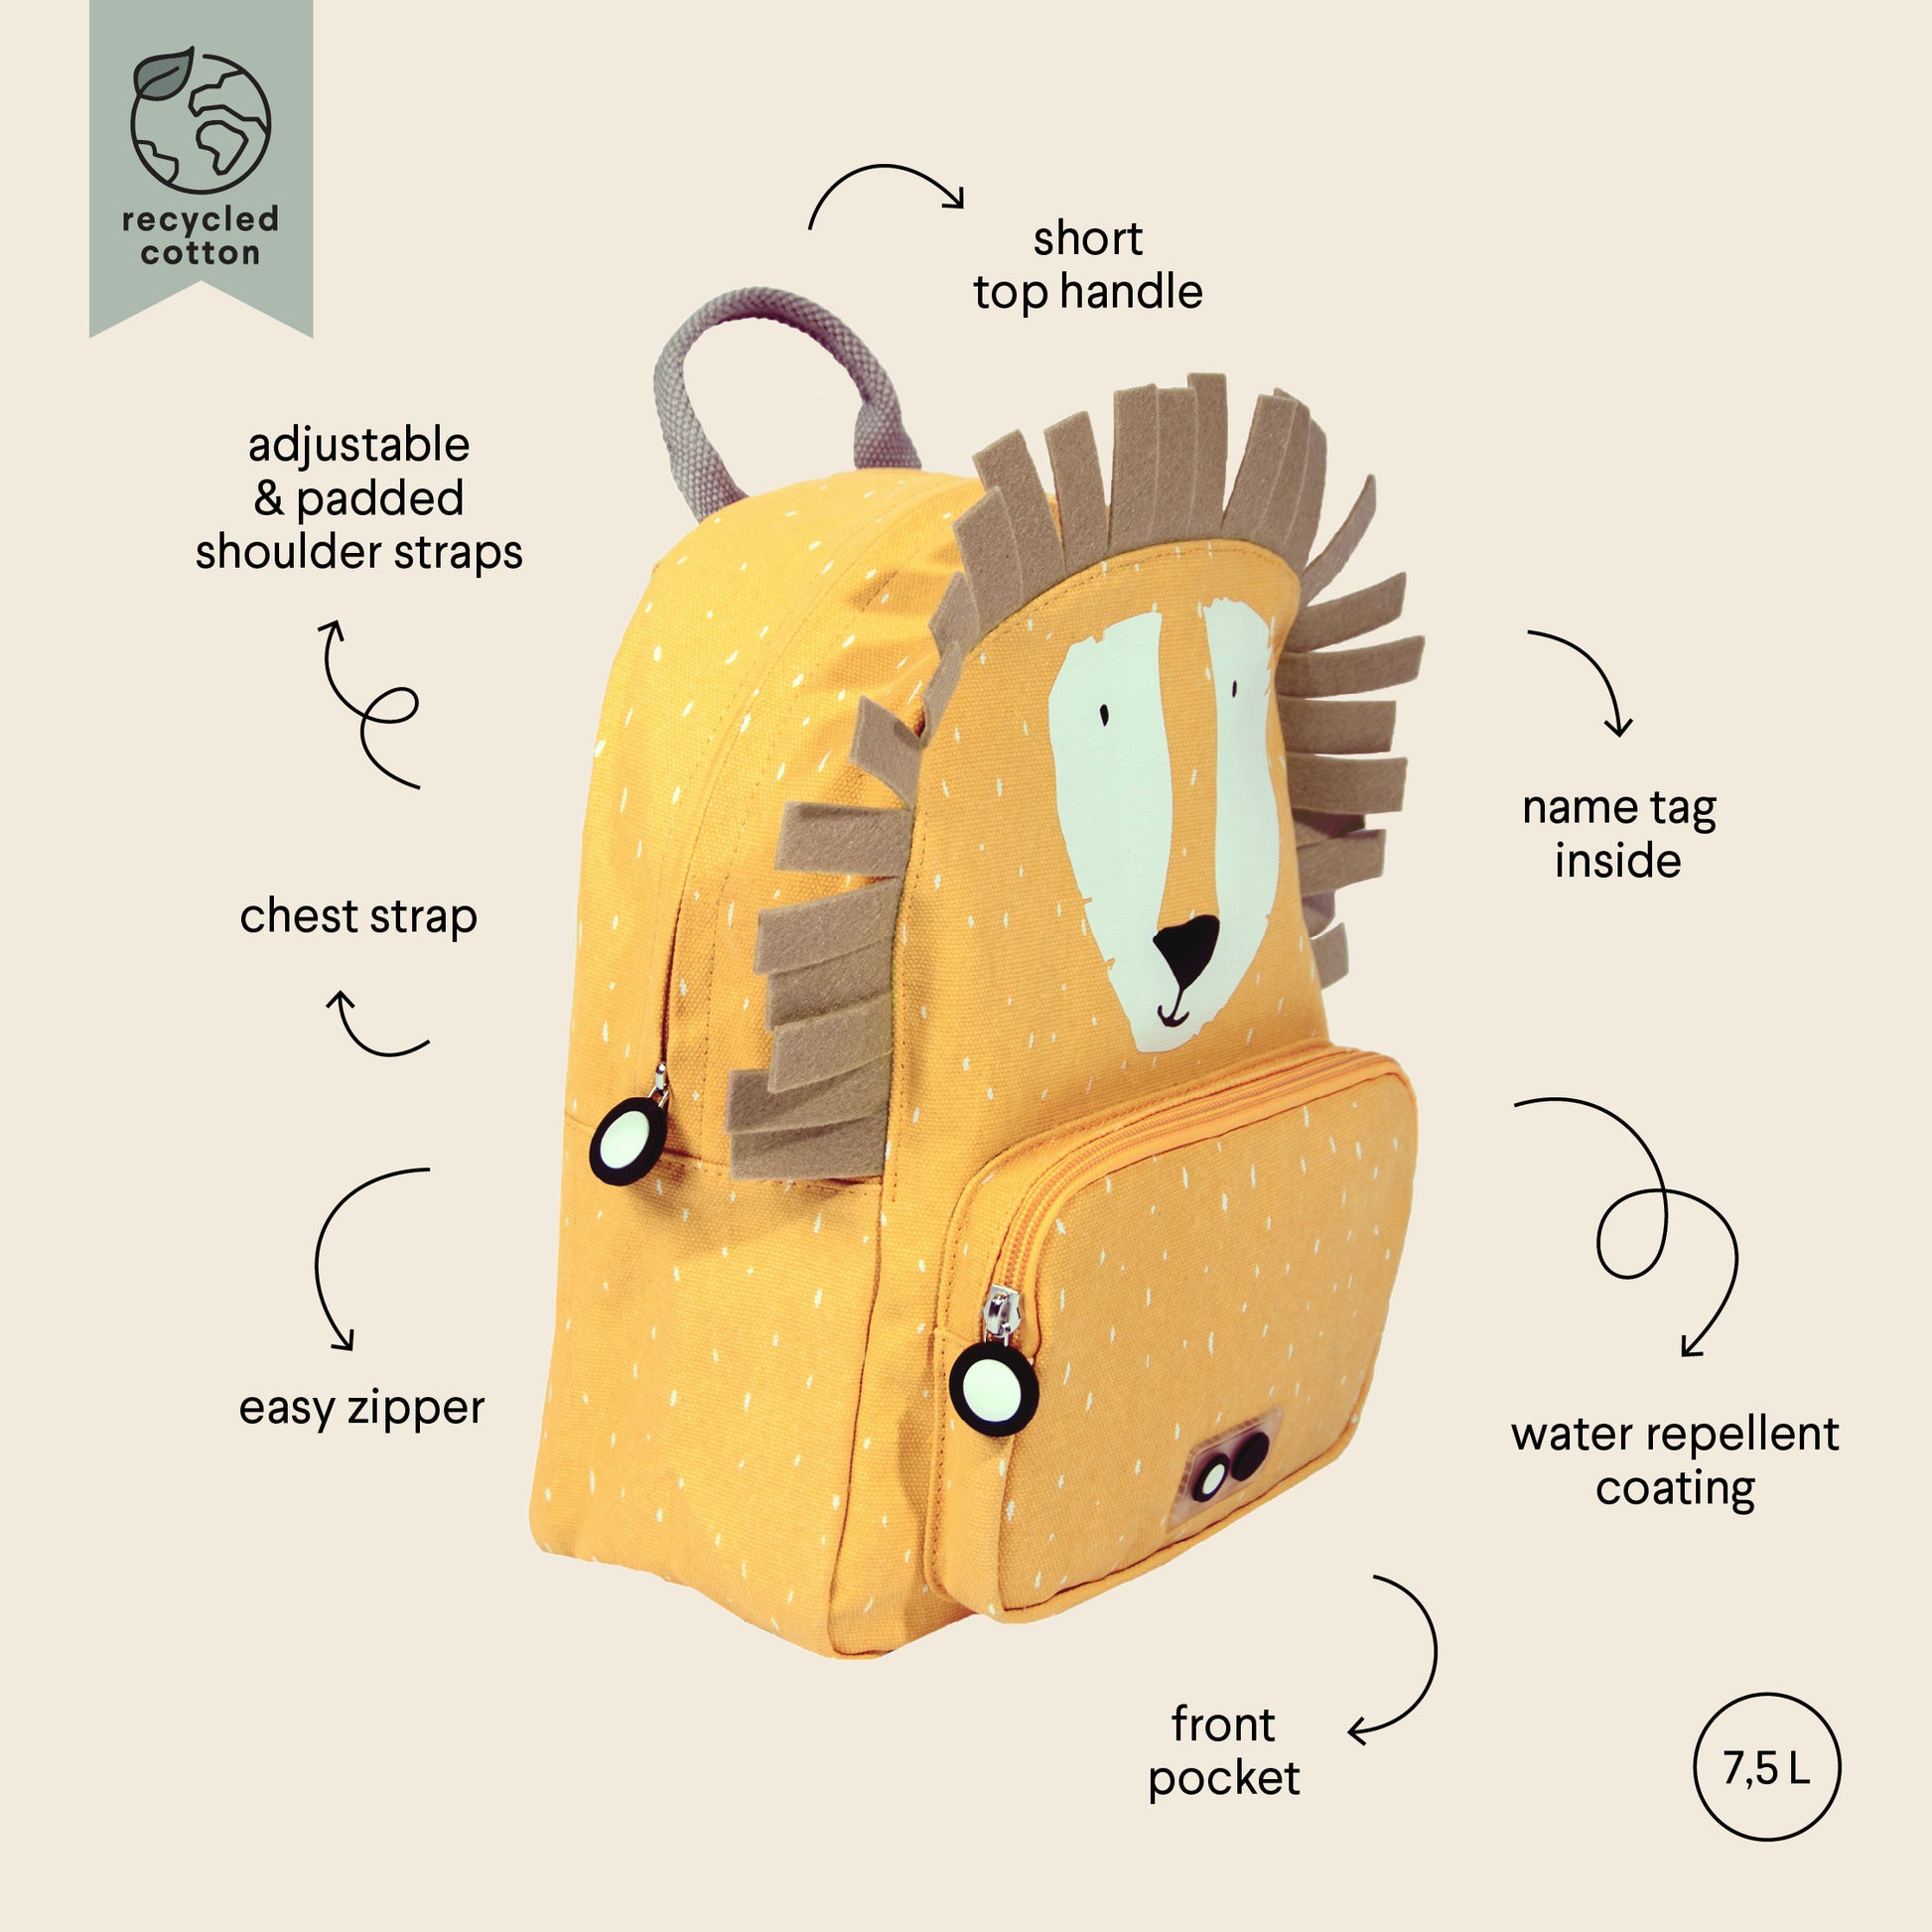 A yellow backpack featuring Mr. Lion face design. Adjustable padded straps, chest strap, water-repellent coating, big compartment, front pocket, and name tag inside. Ideal for ages 3+. Dimensions: 31 x 23 x 10 cm.